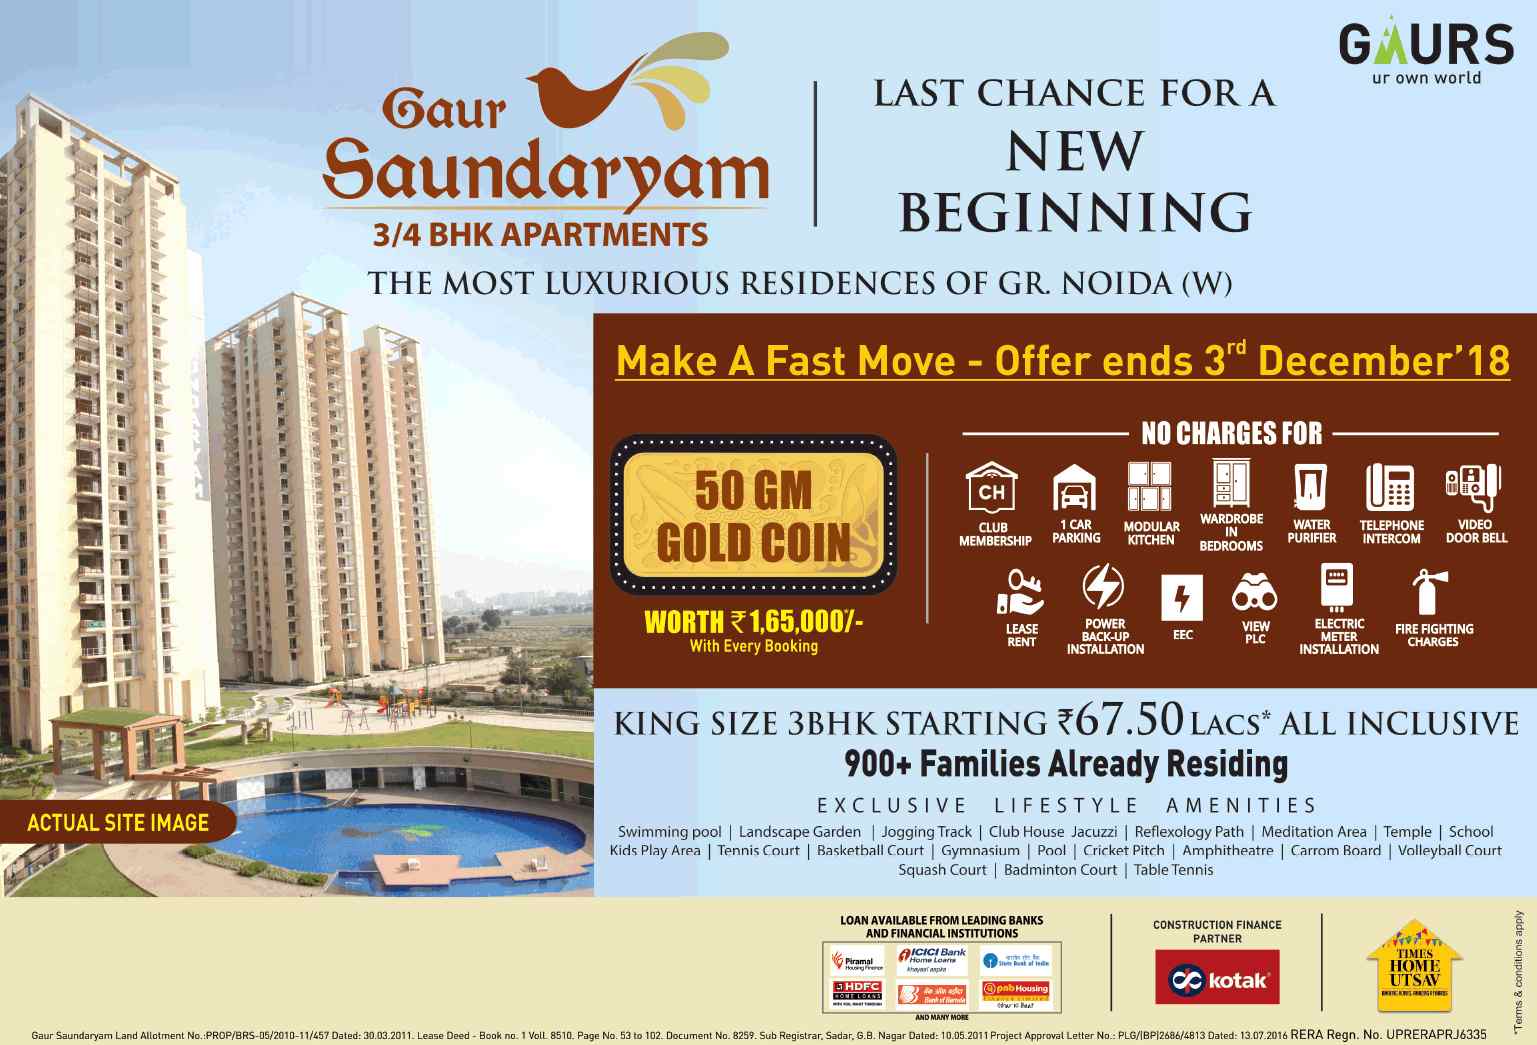 Get 50 gm gold coin with every booking at Gaur Saundaryam in Sector 1, Greater Noida Update